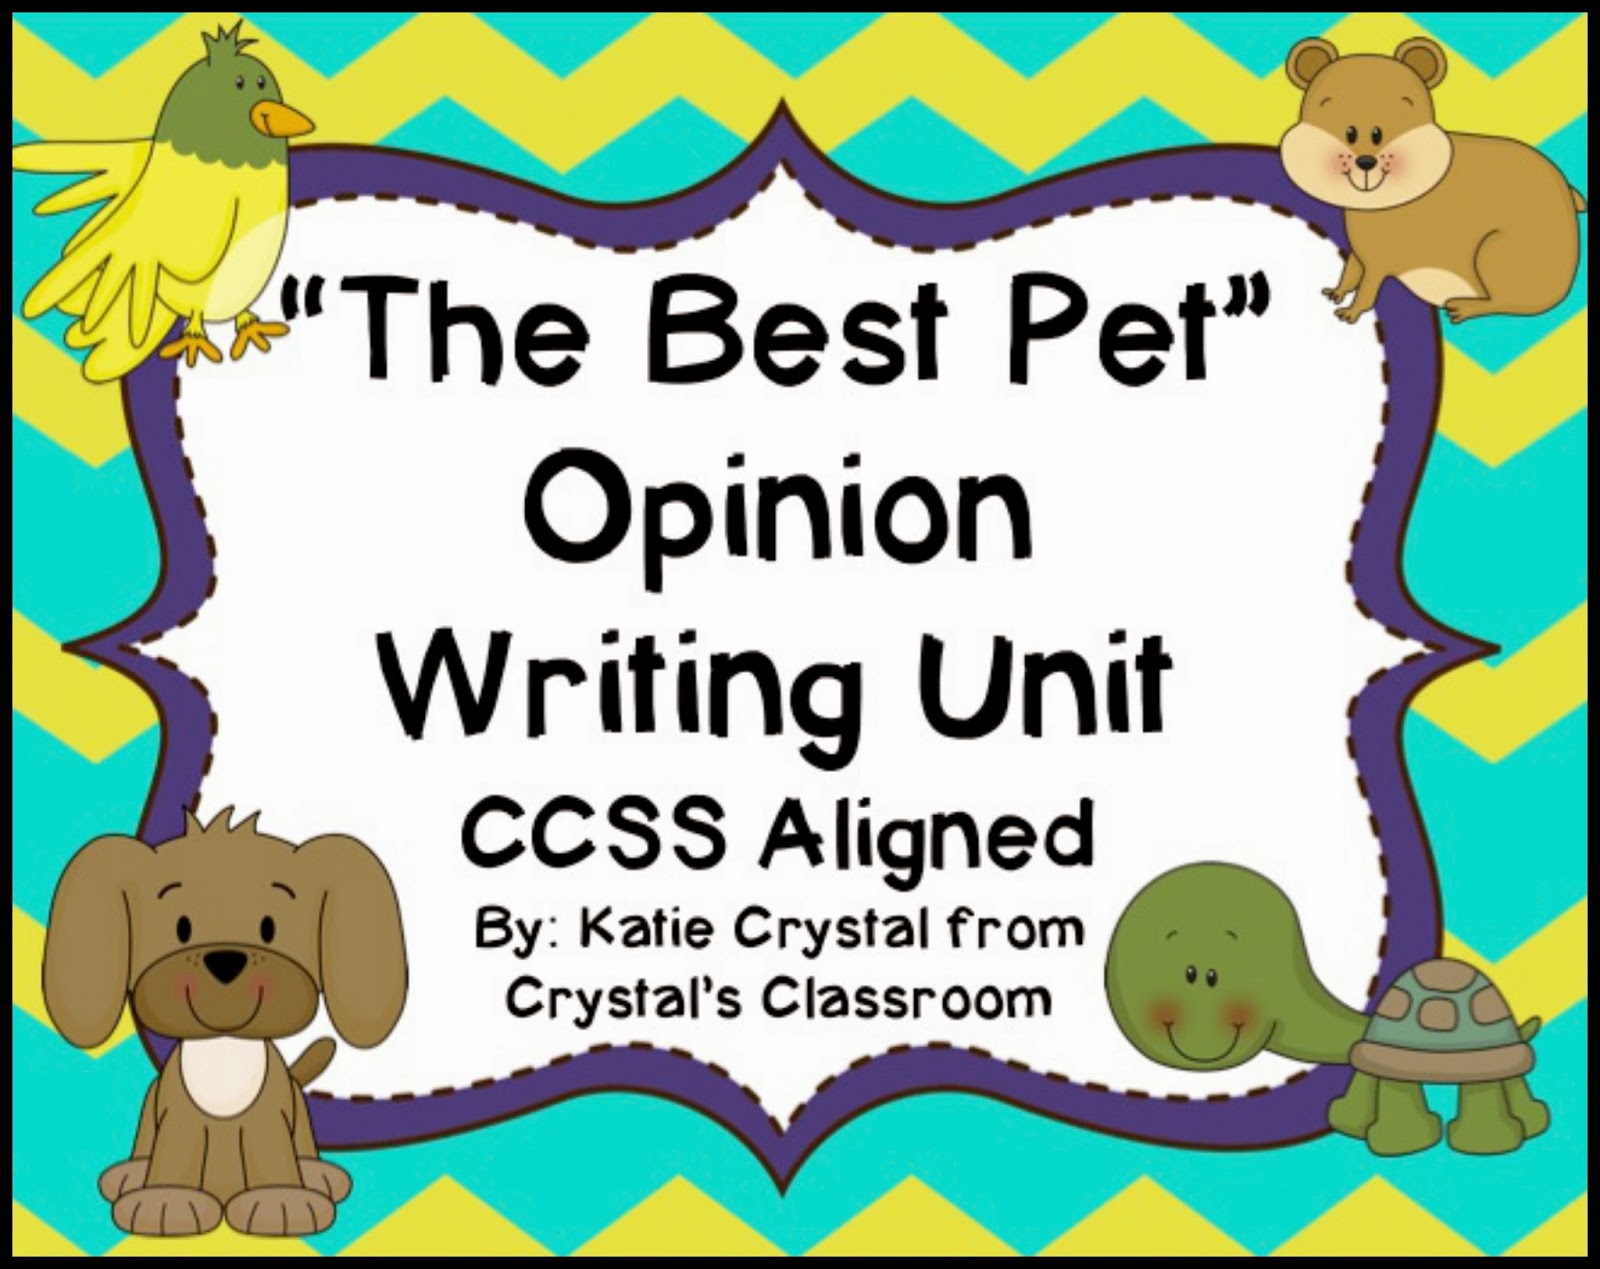 Pet writing 3. Pet writing. Many Classroom have Pets. This is the best.